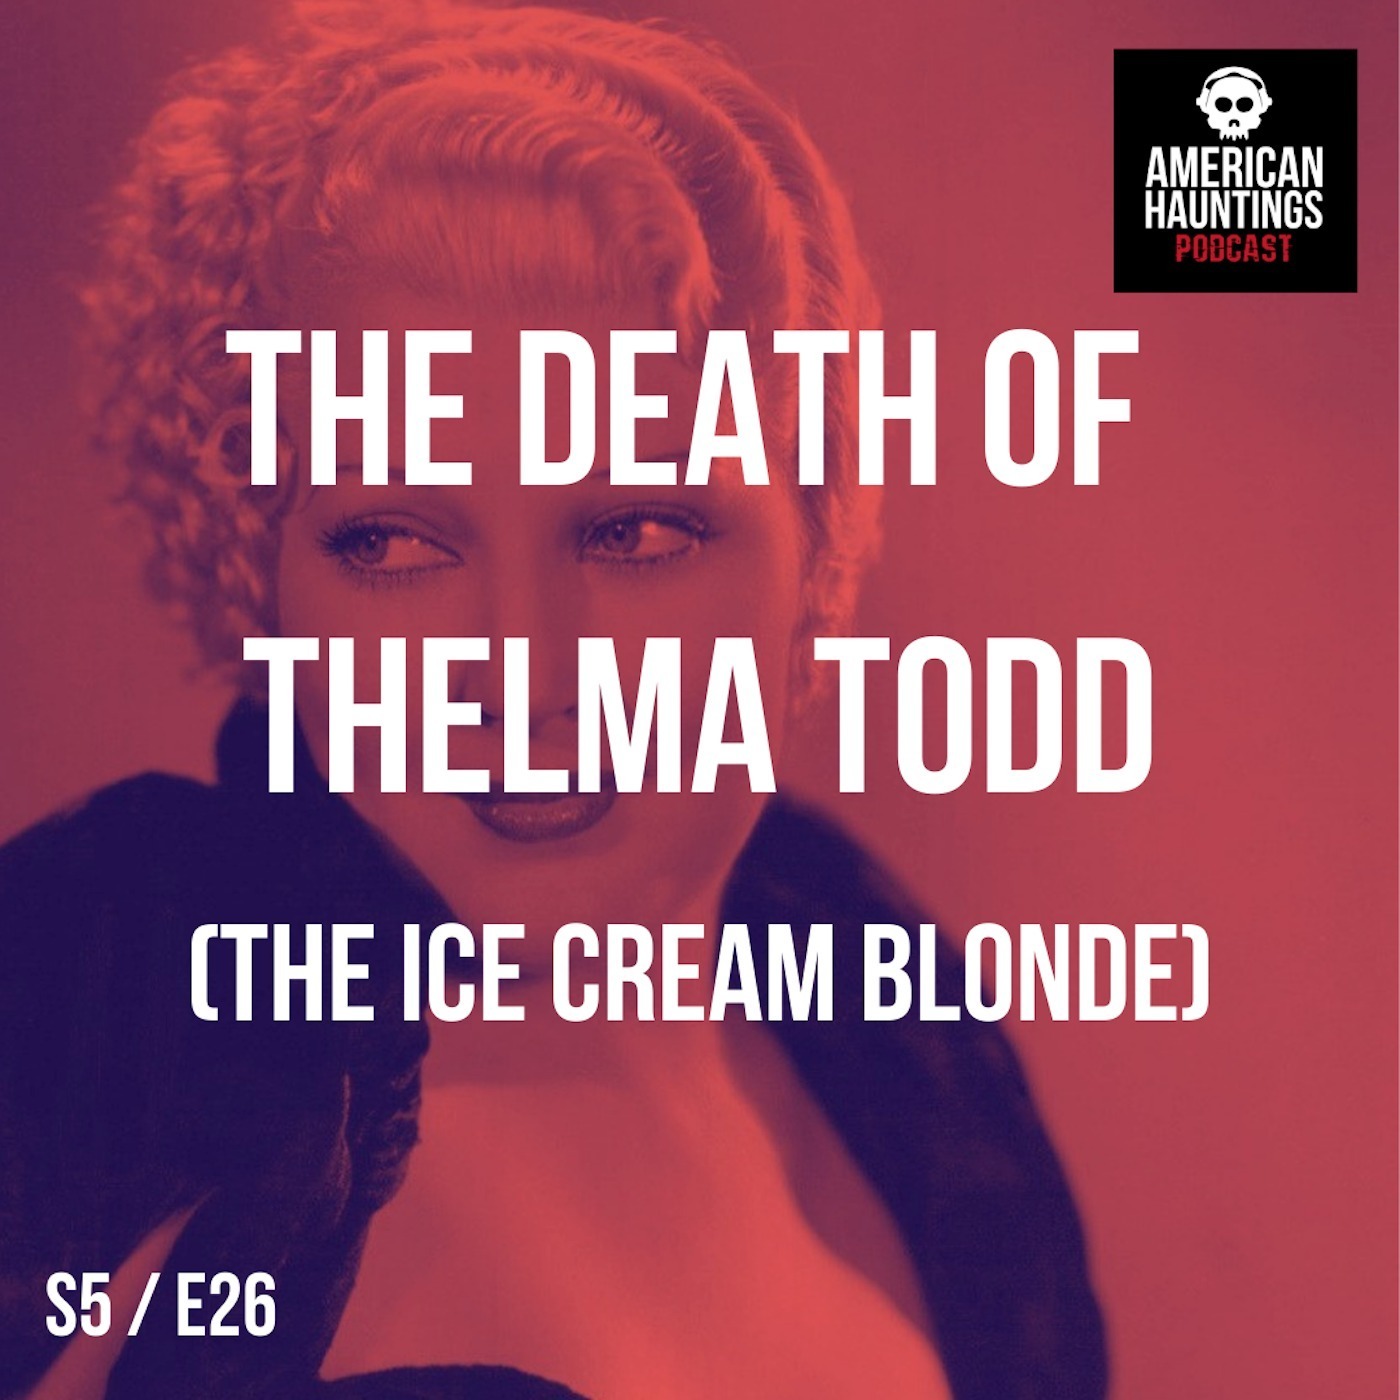 The Death of Thelma Todd (The Ice Cream Blonde)